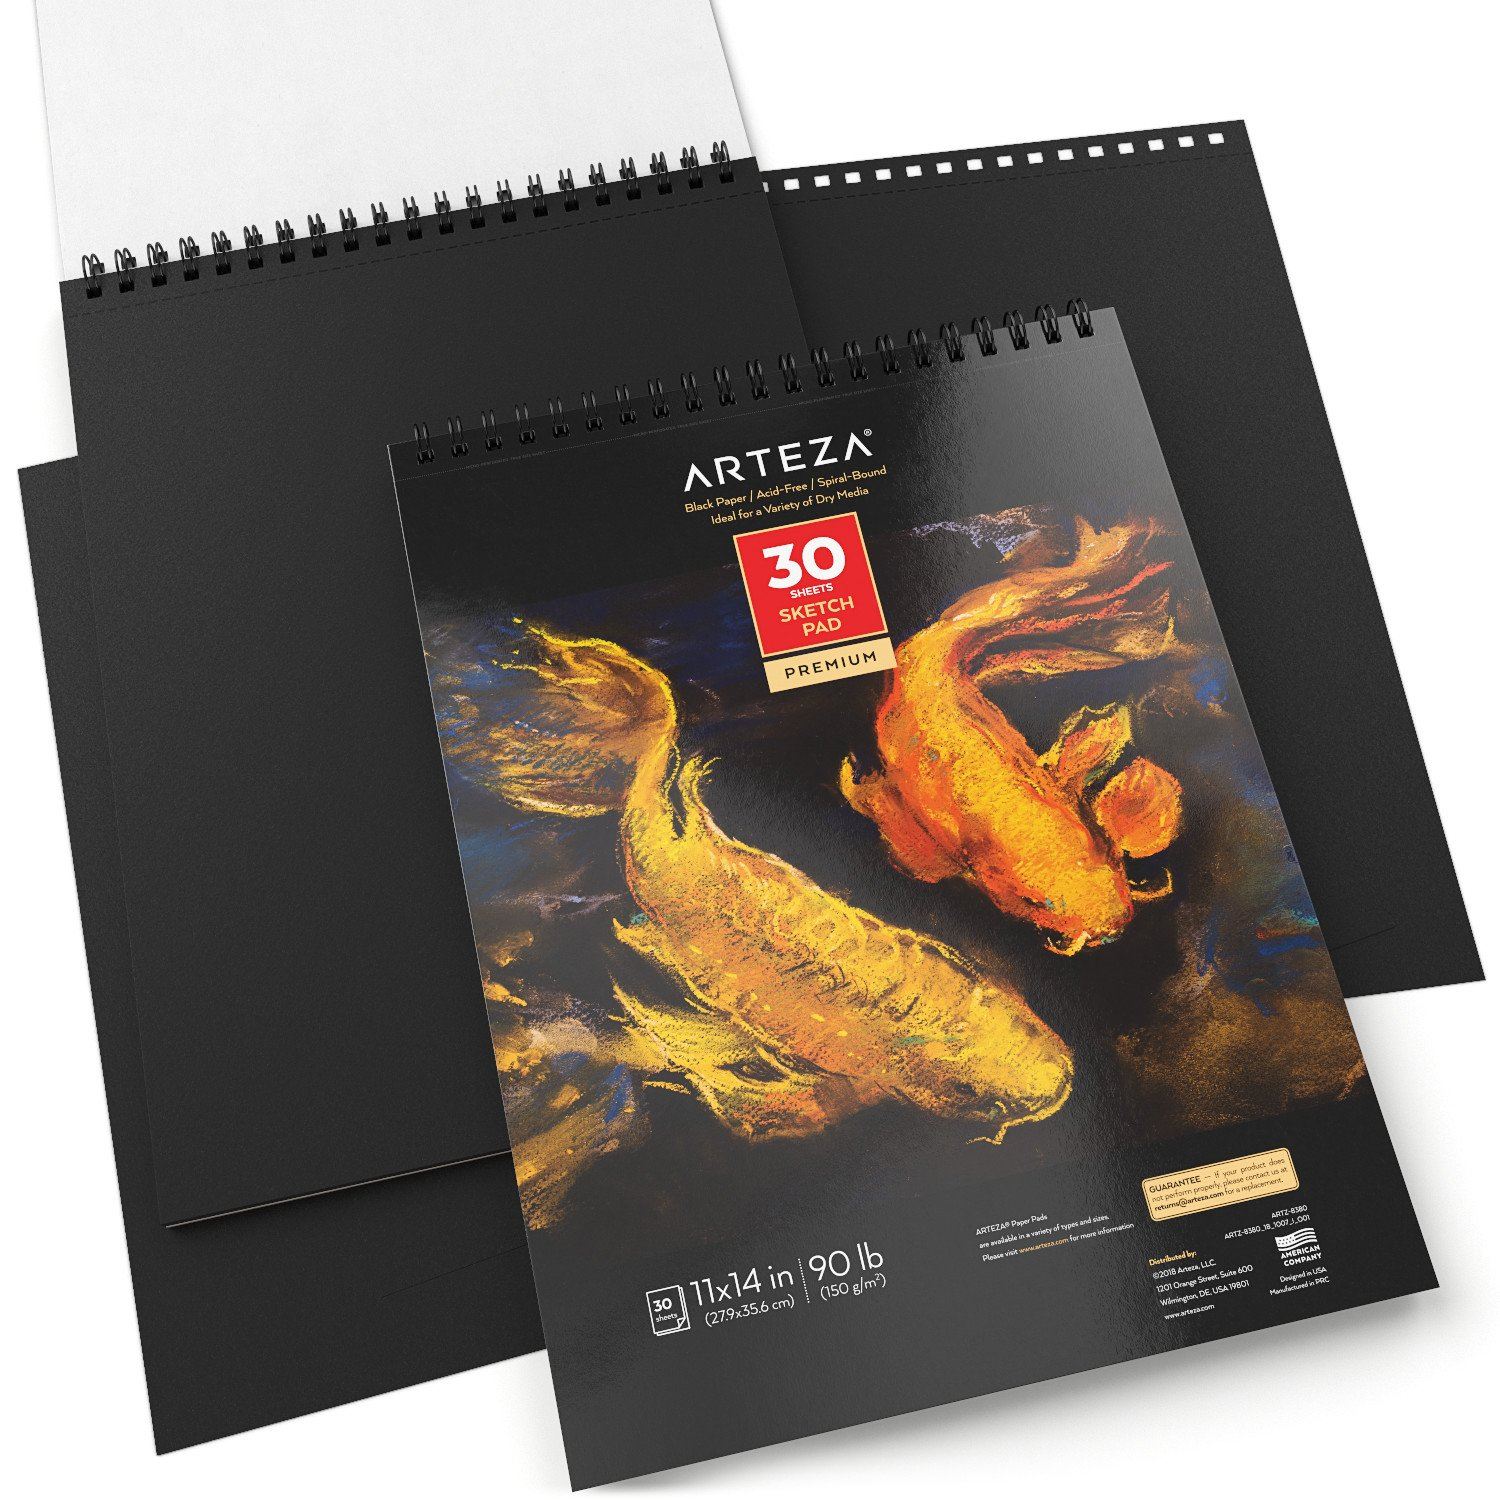 Shop Sketch Pads and Art Canvases Online